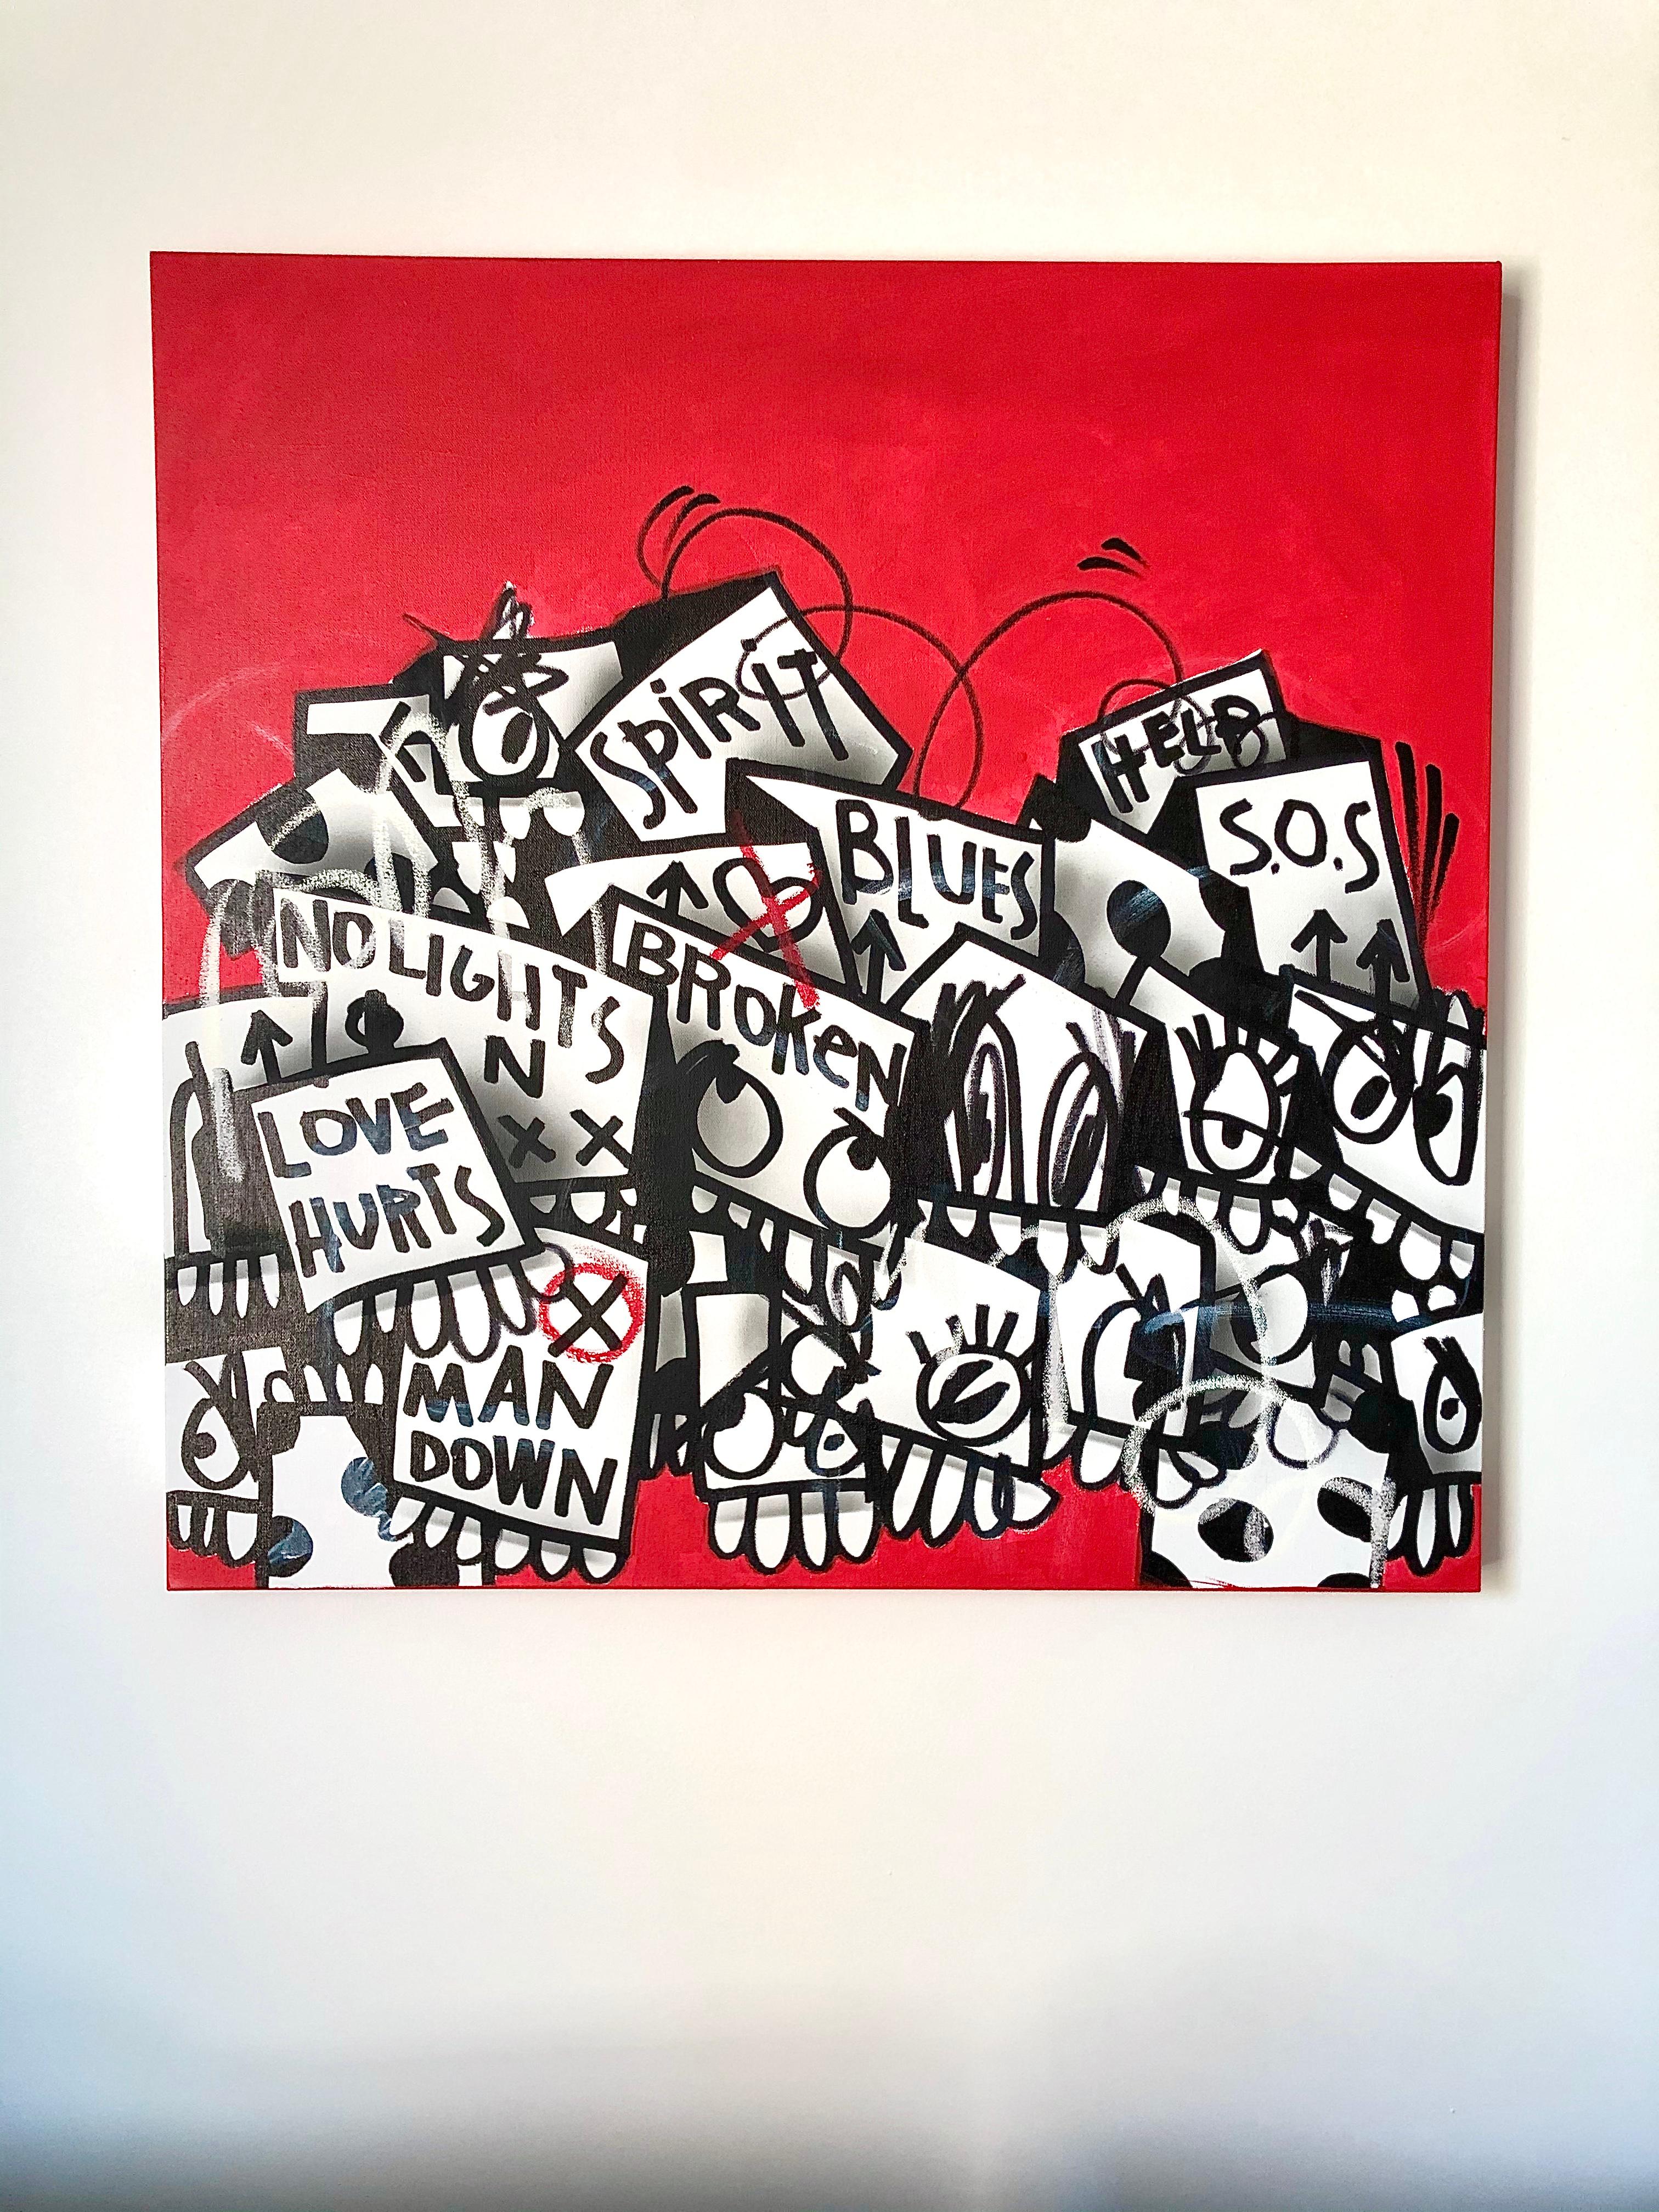 "East Village NYC" - Painting by Flore